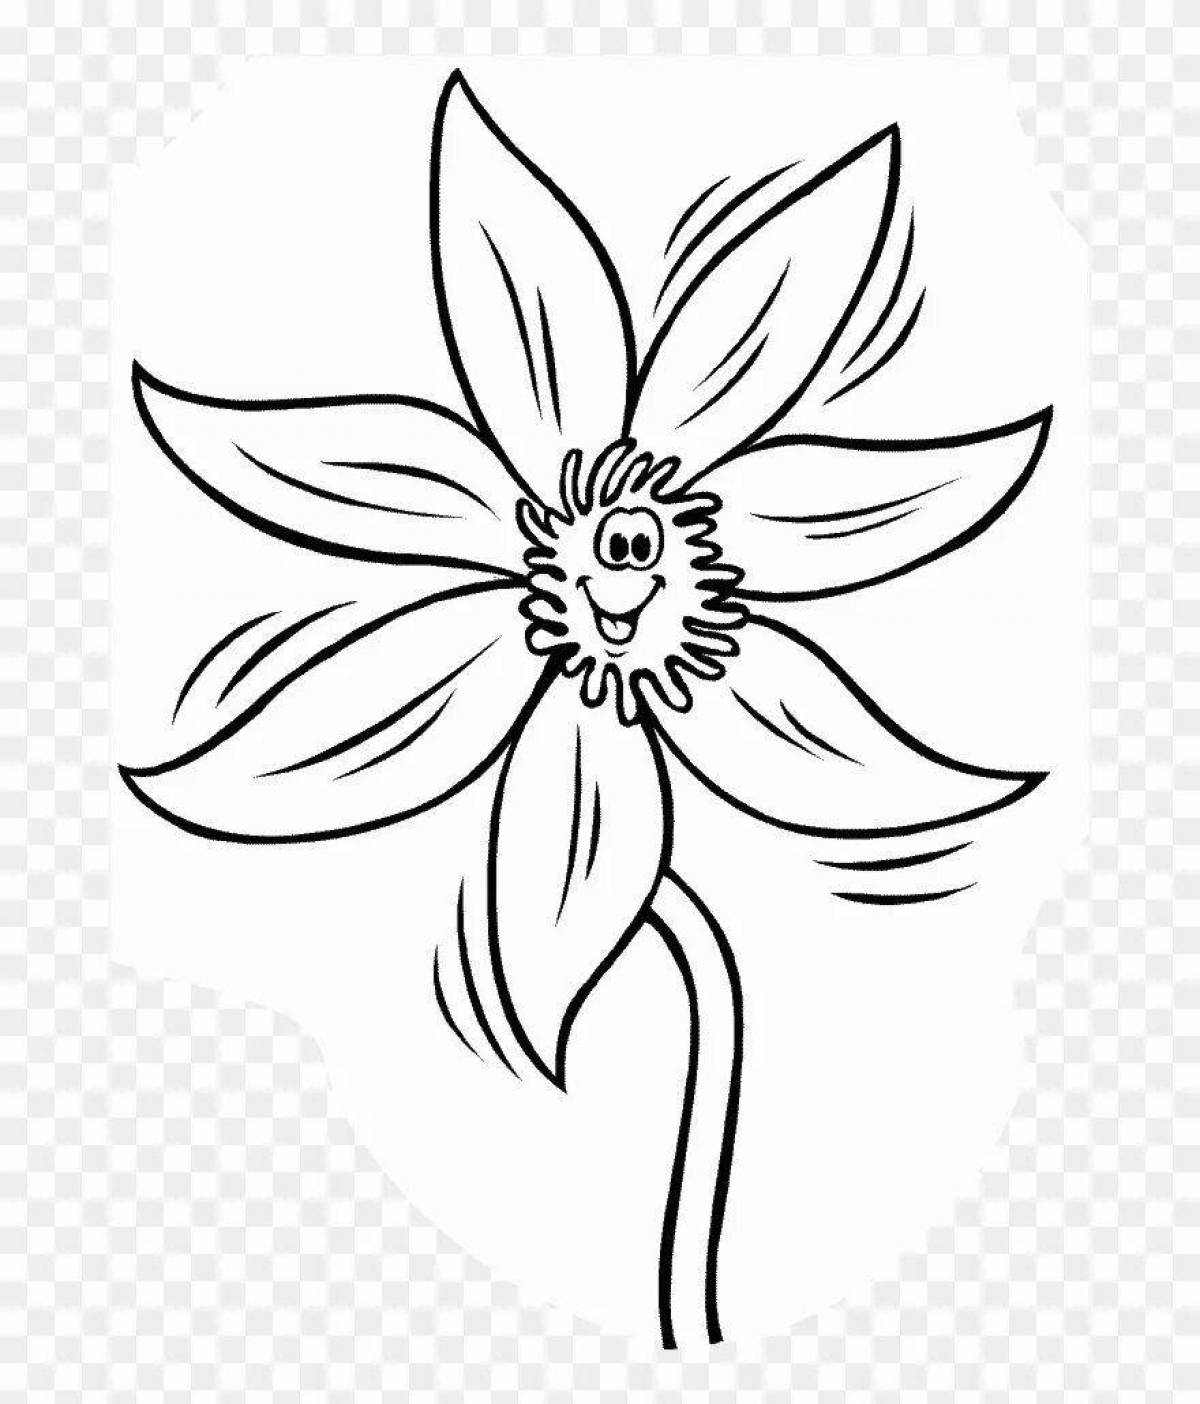 Joyful unknown flower coloring page